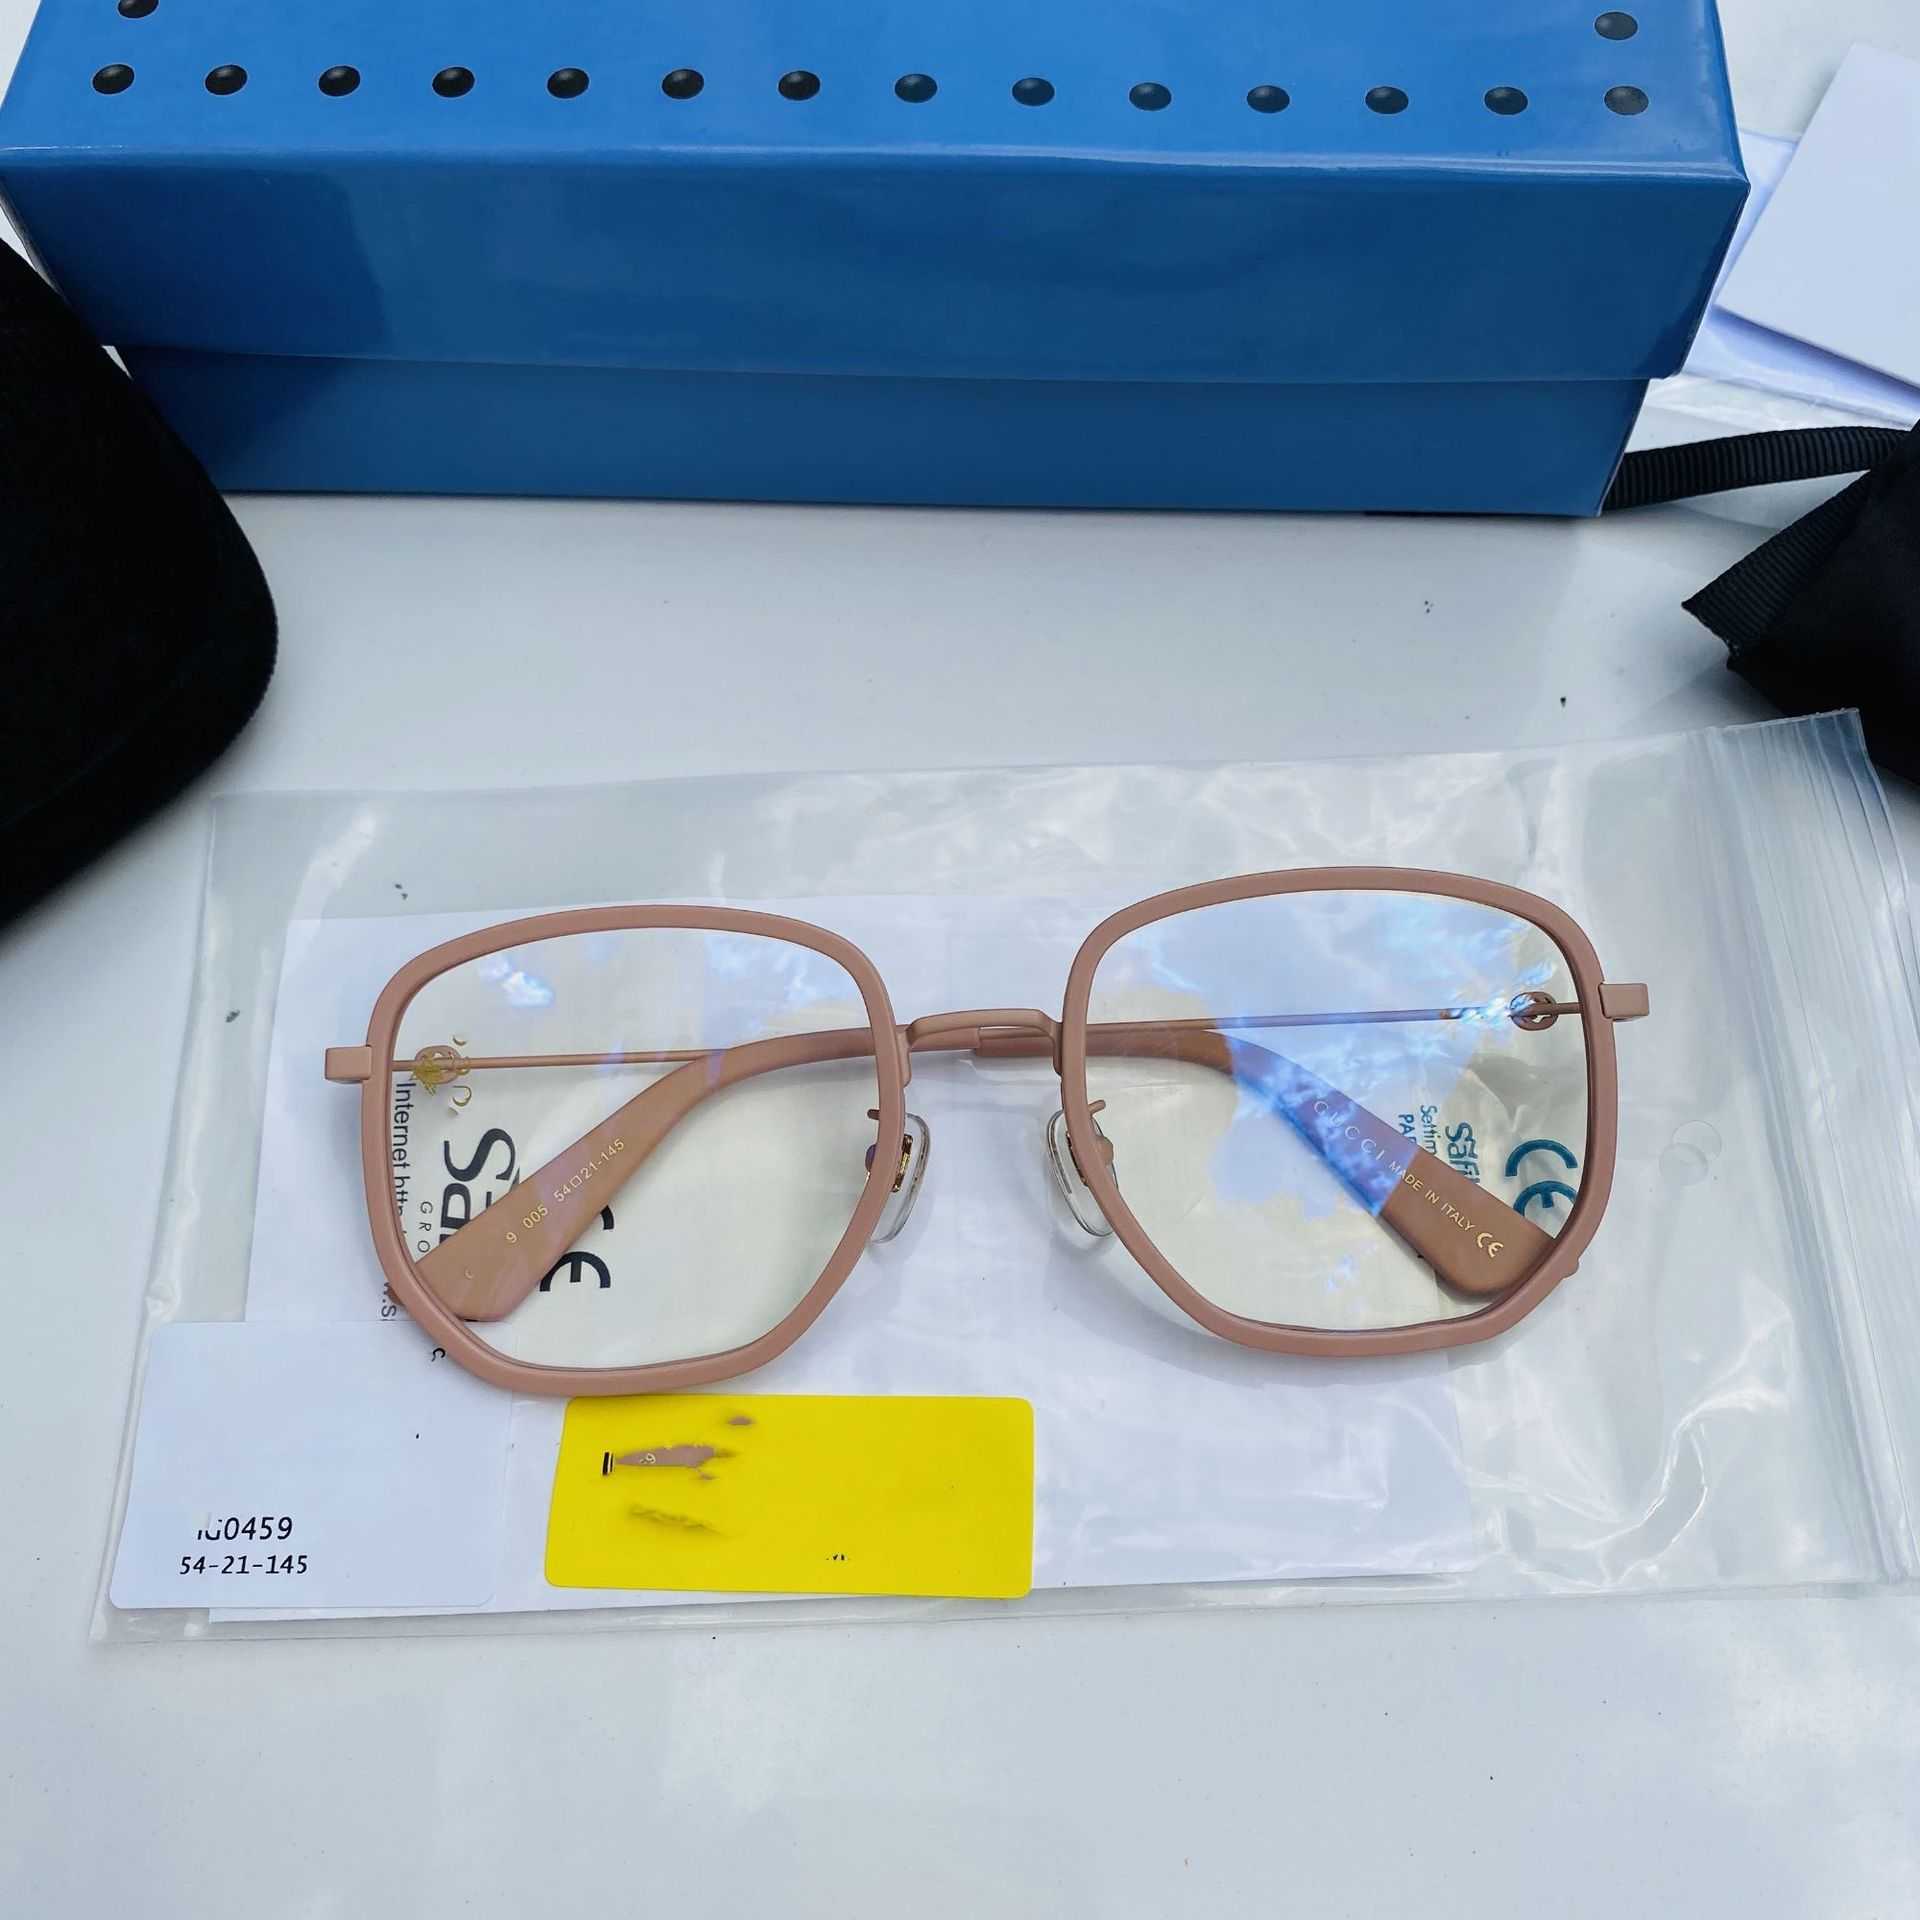 2023 New luxury designer sunglasses new gg0459 flat lens has an irregular frame and is popular. The plain face can paired with a myopic little bee